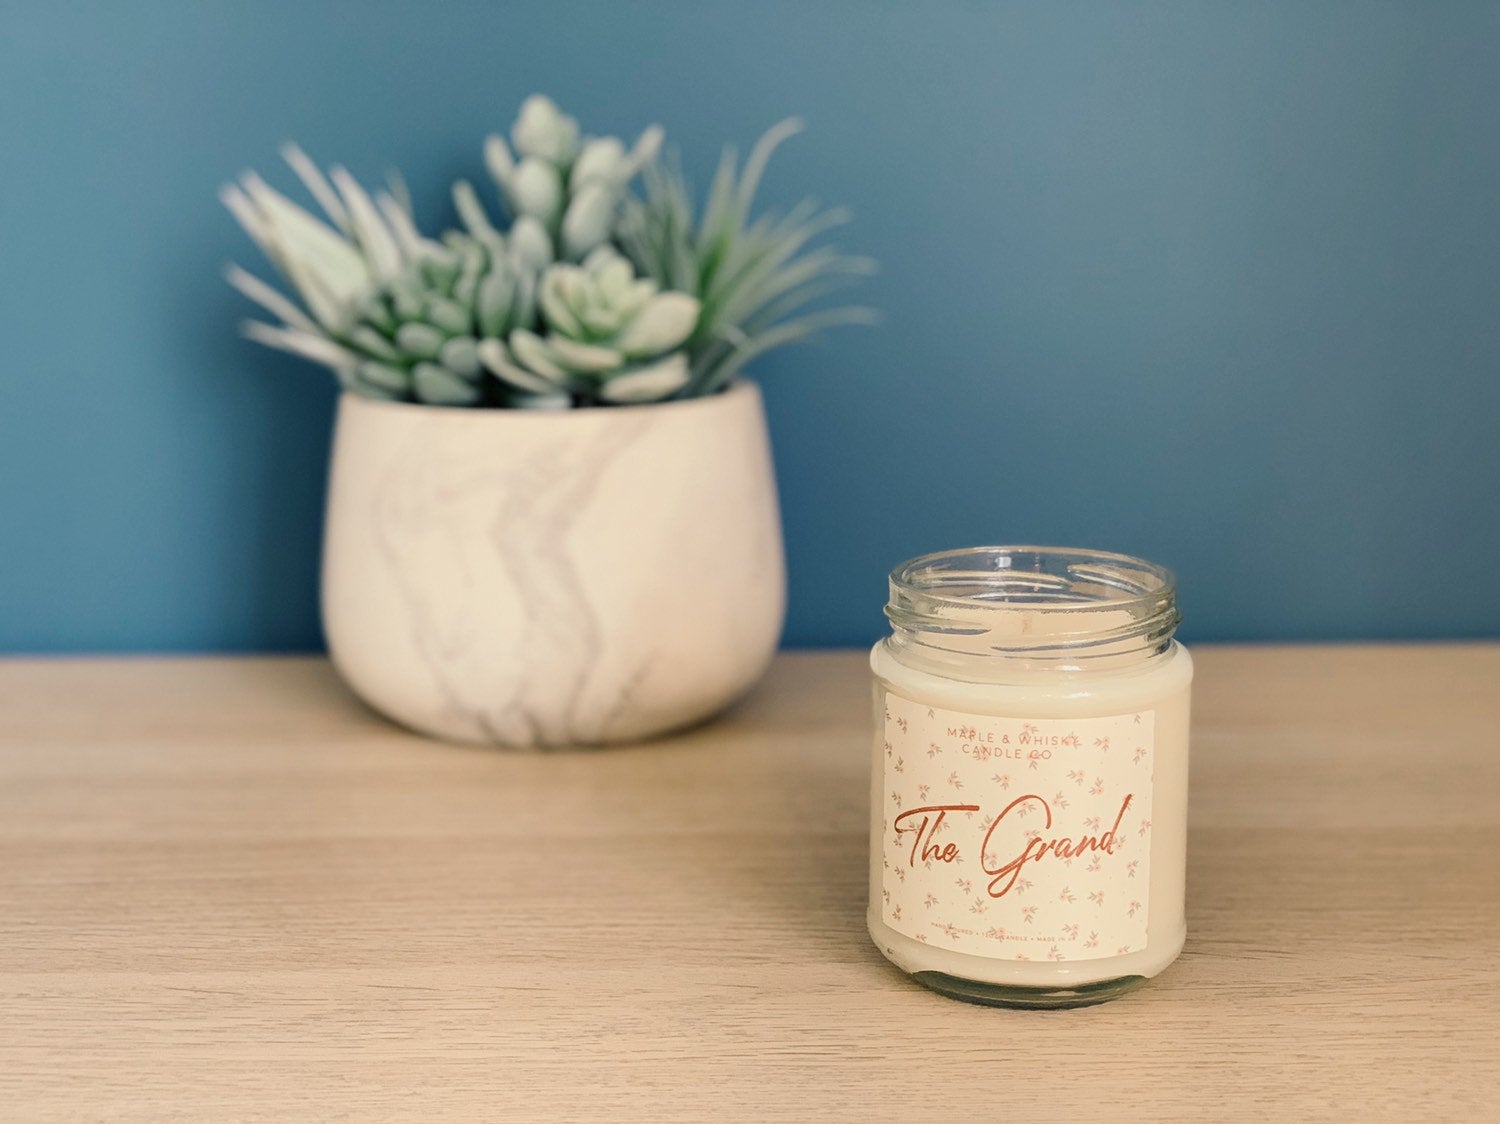 The Grand - Jar Candle